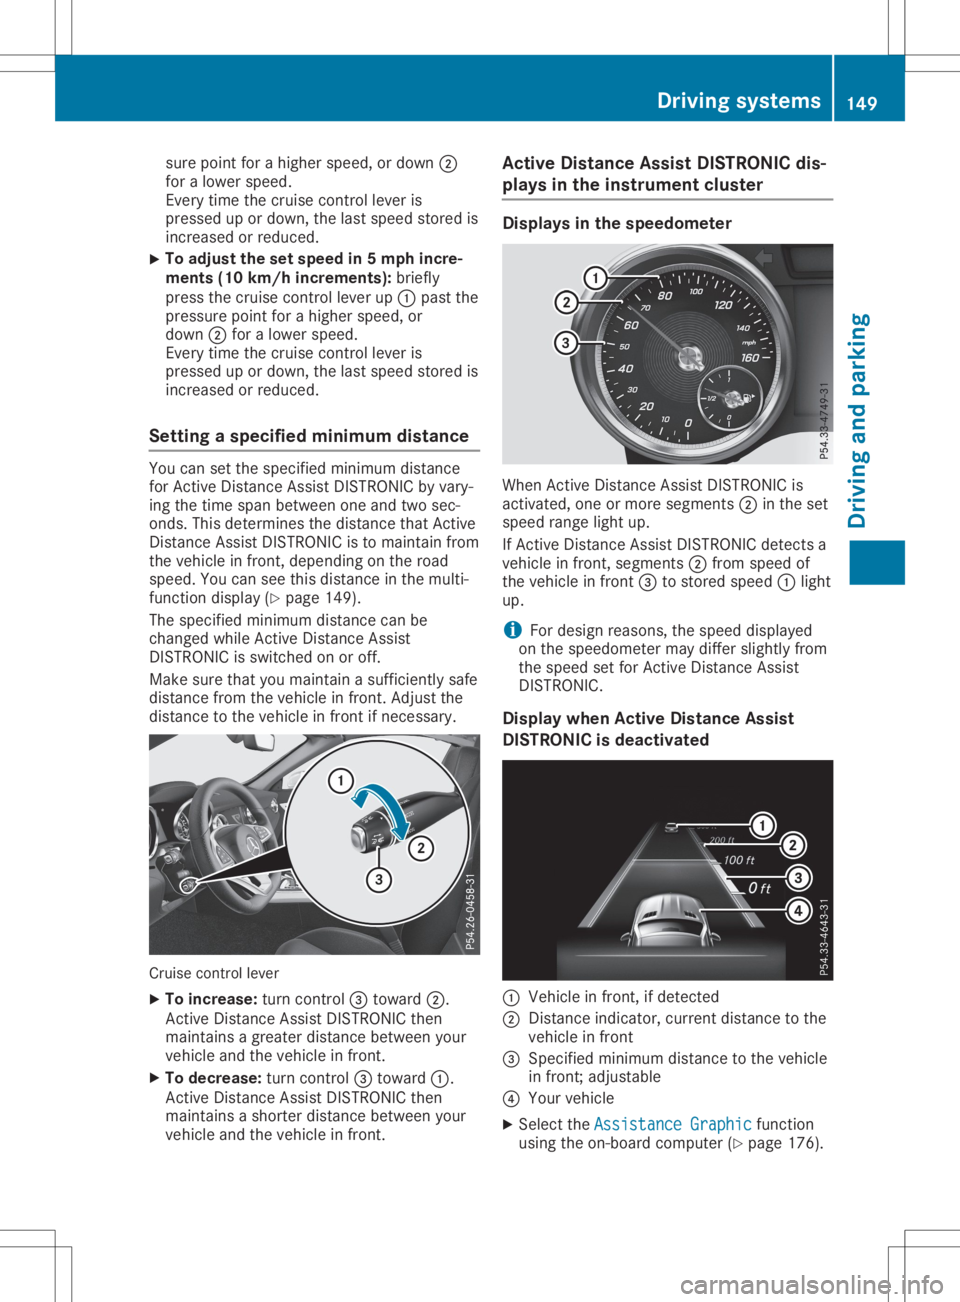 MERCEDES-BENZ SLC 2020  Owners Manual sure
point forahigher speed, ordown 0044
for alower speed.
Every timethecruise controllever is
pressed upordown, thelast speed stored is
increased orreduced.
X To
adju stthe setspeed in5m phincre-
men